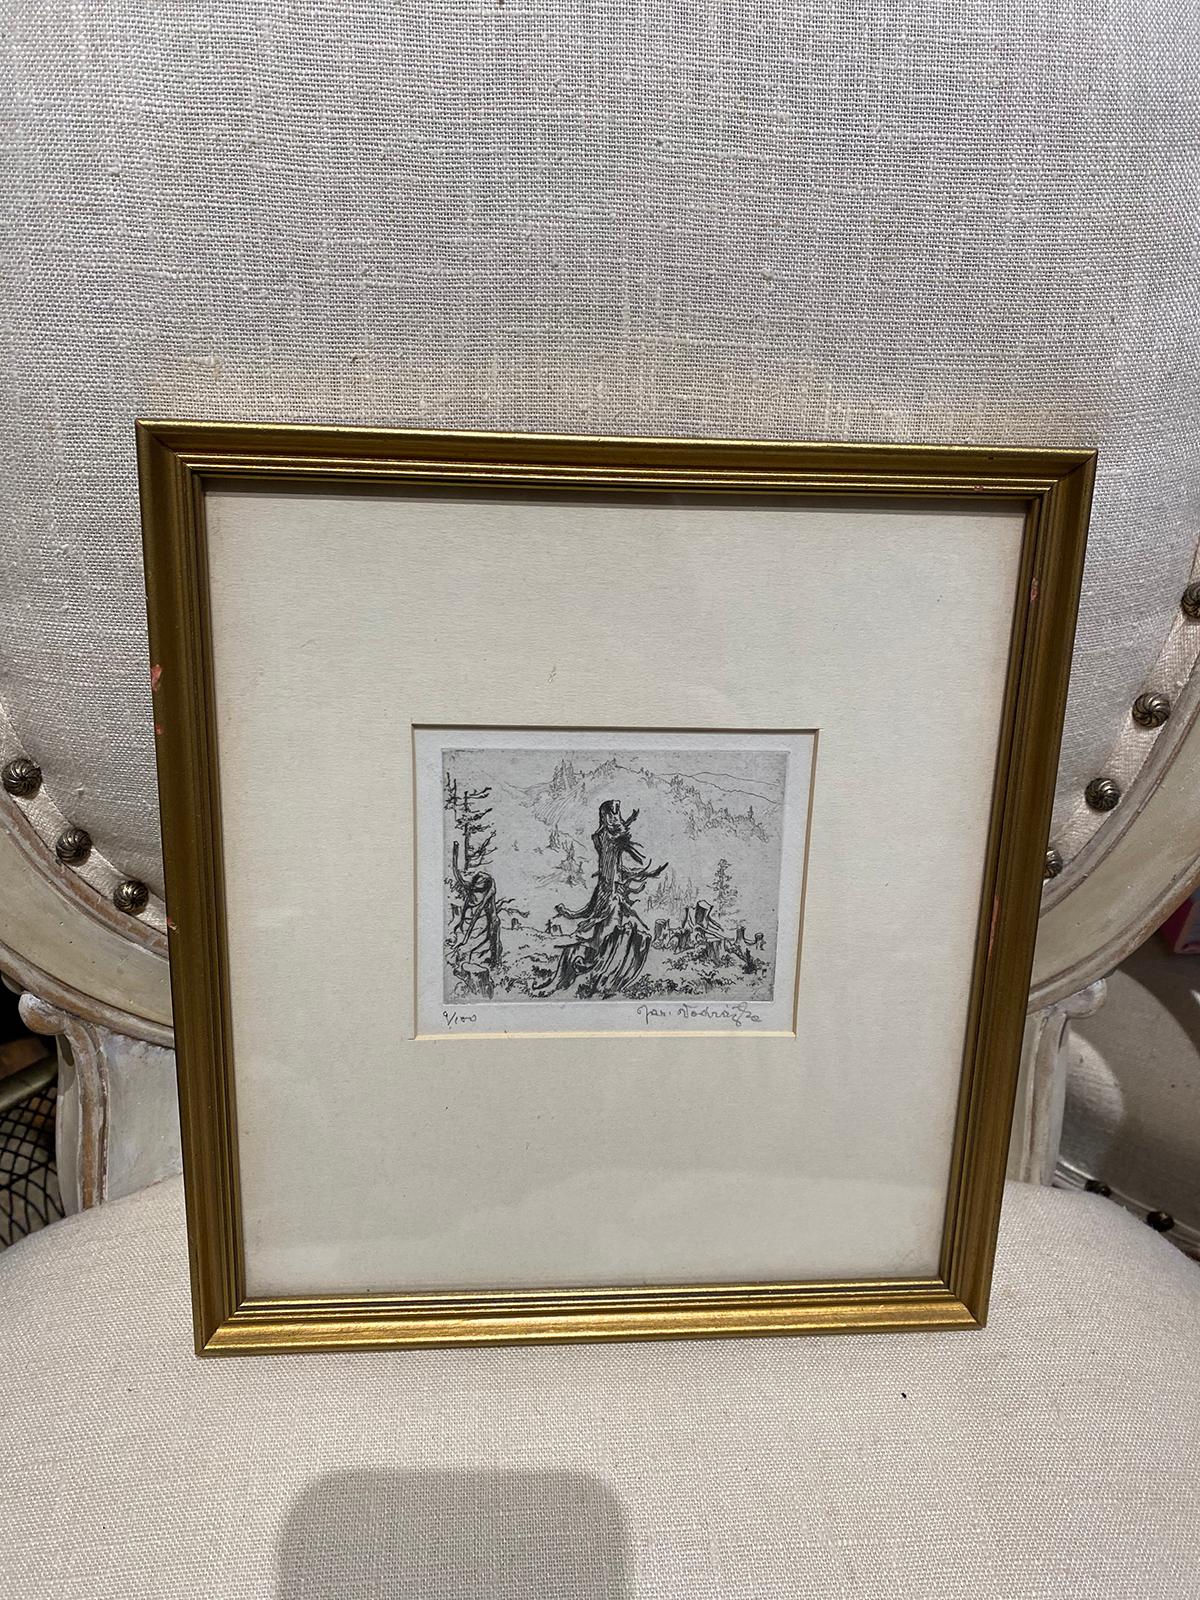 Framed 20th century etching of tree, illegible signature.